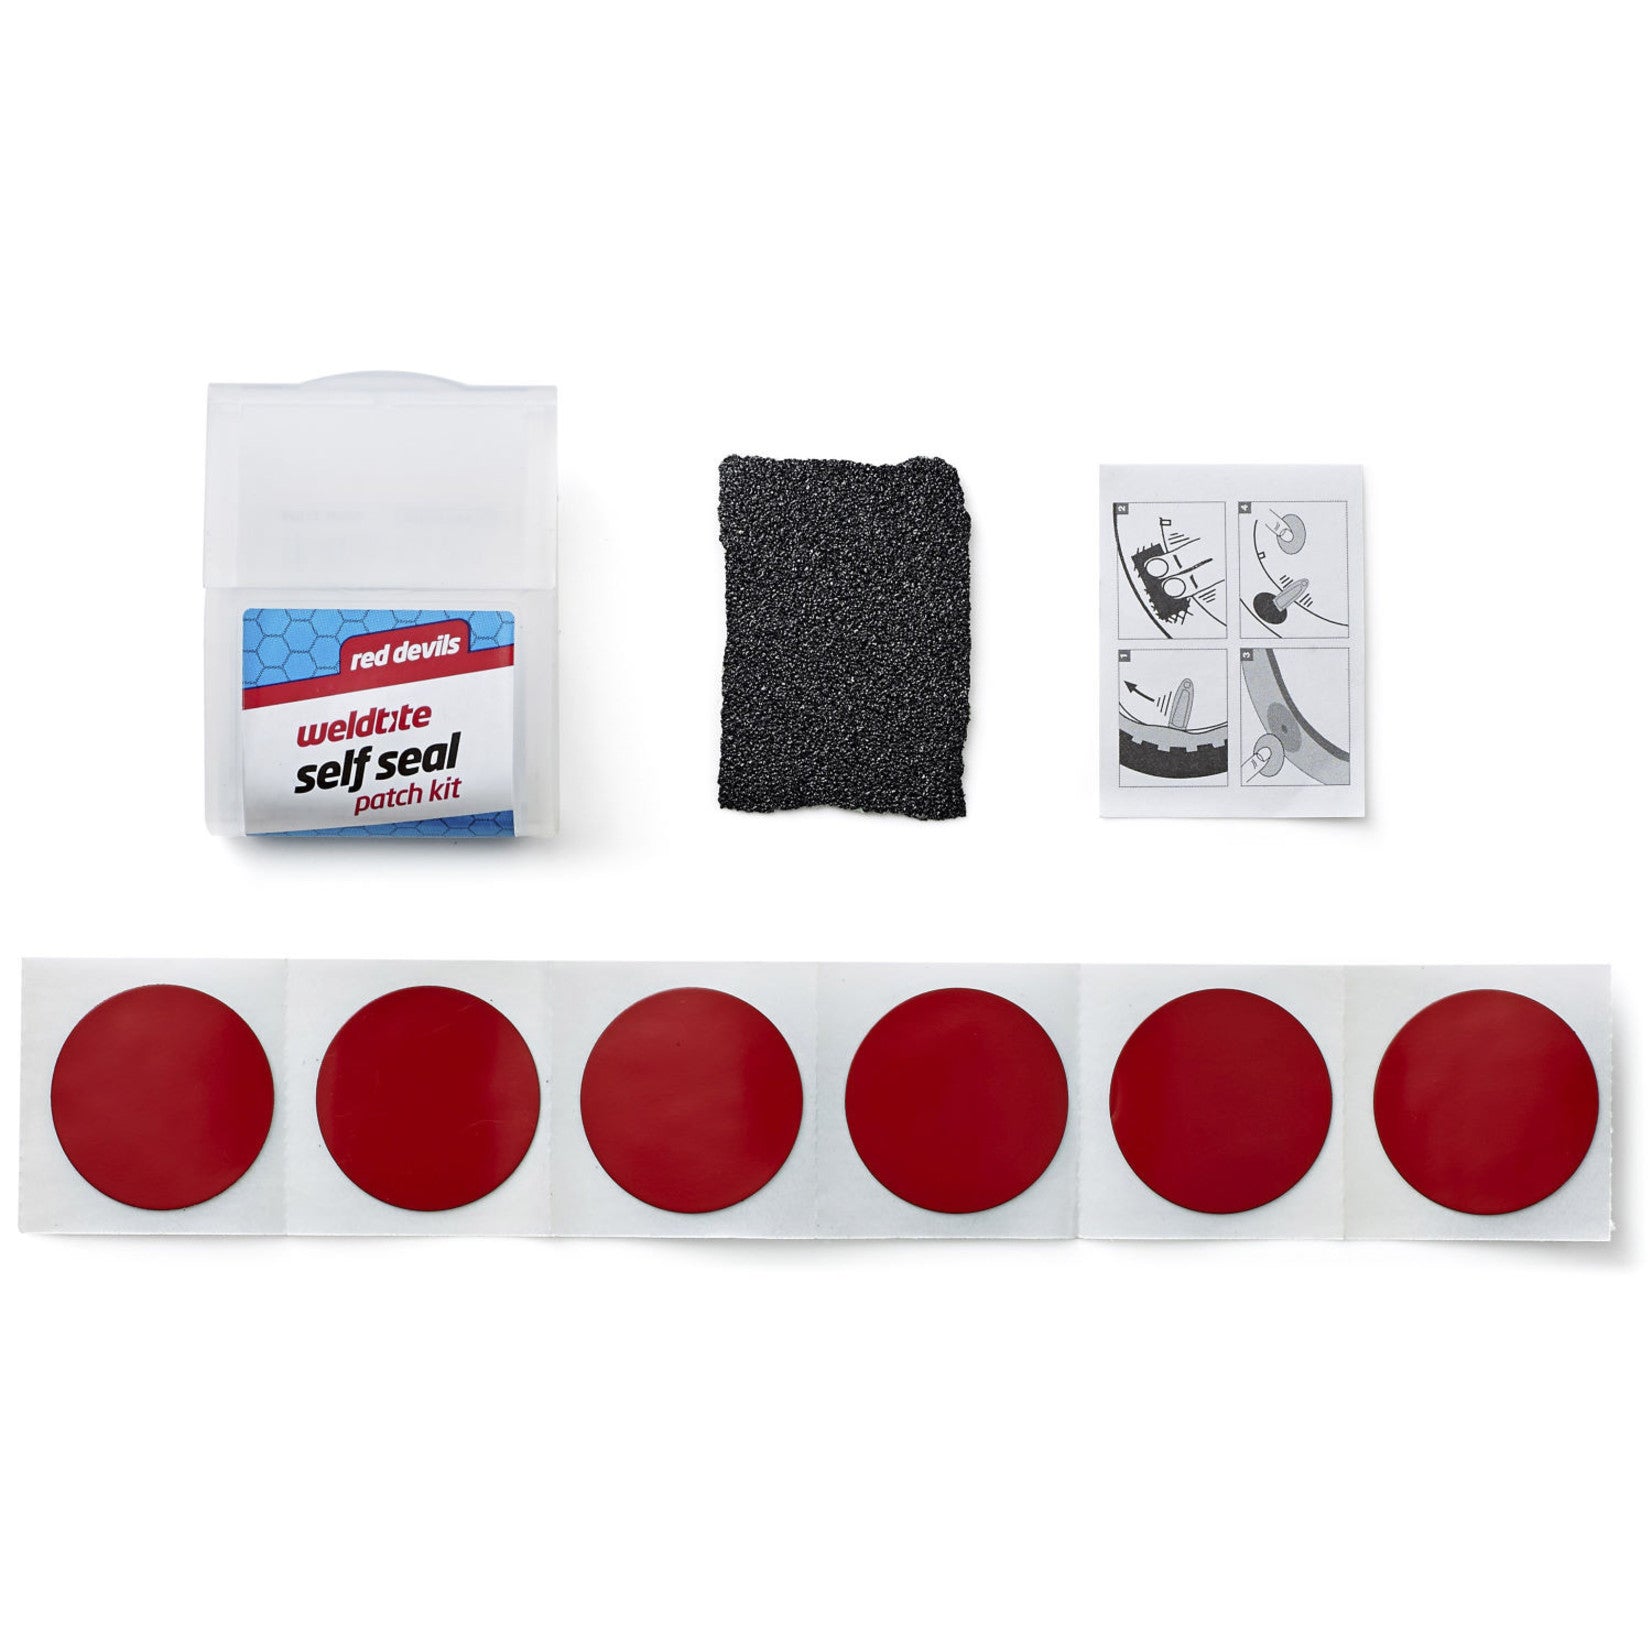 weldtite-self-seal-patch-kit-red-devils